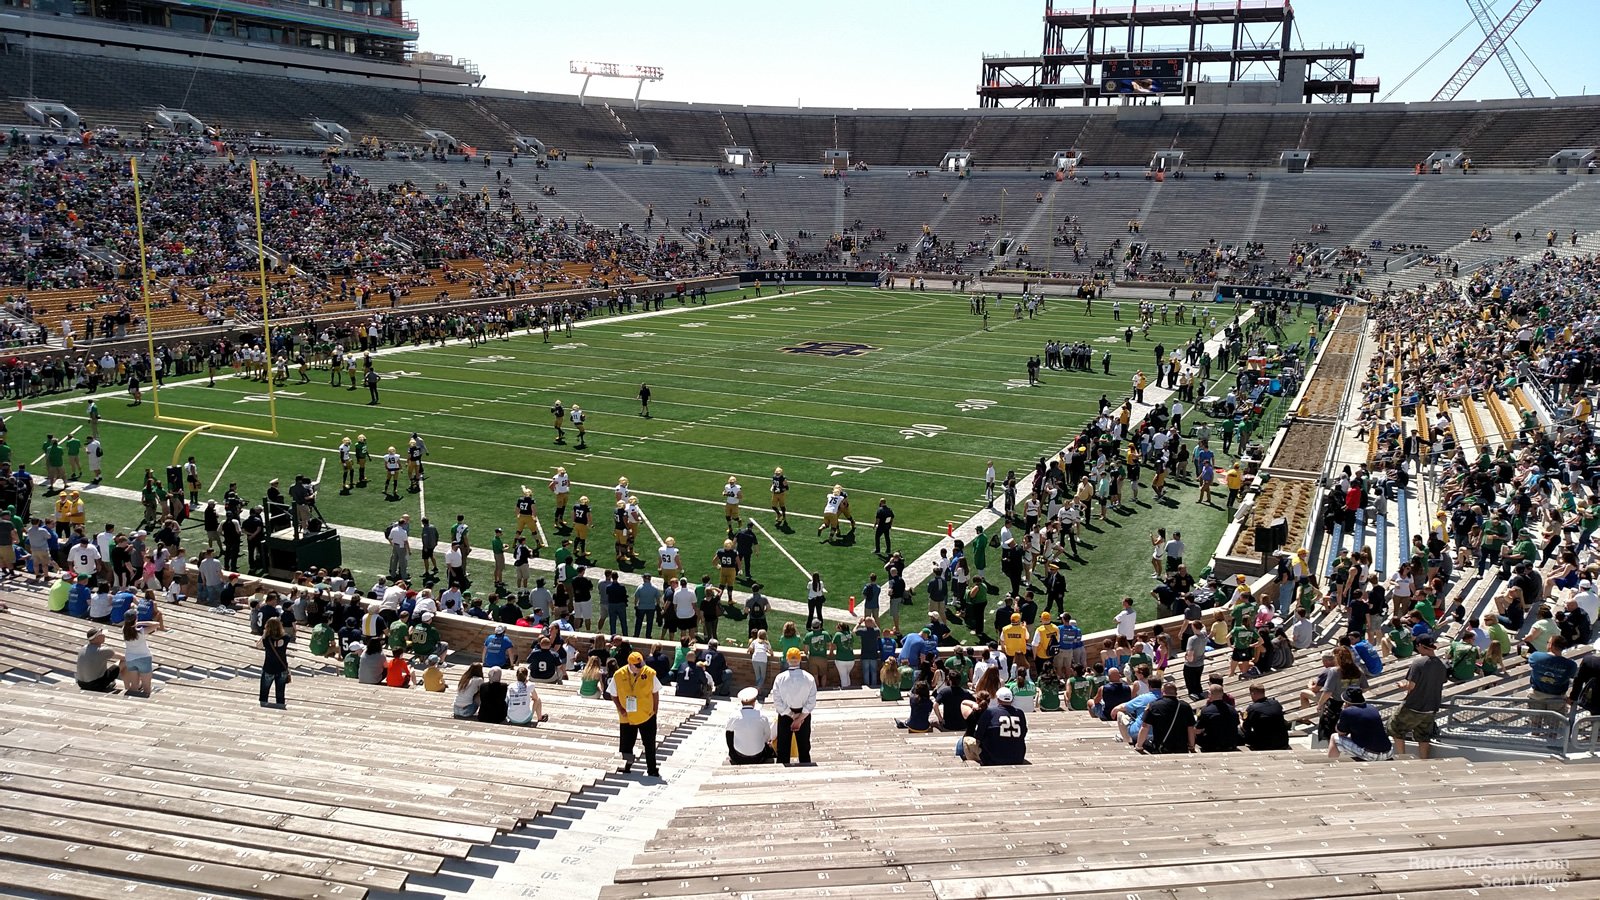 section 34, row 44 seat view  - notre dame stadium